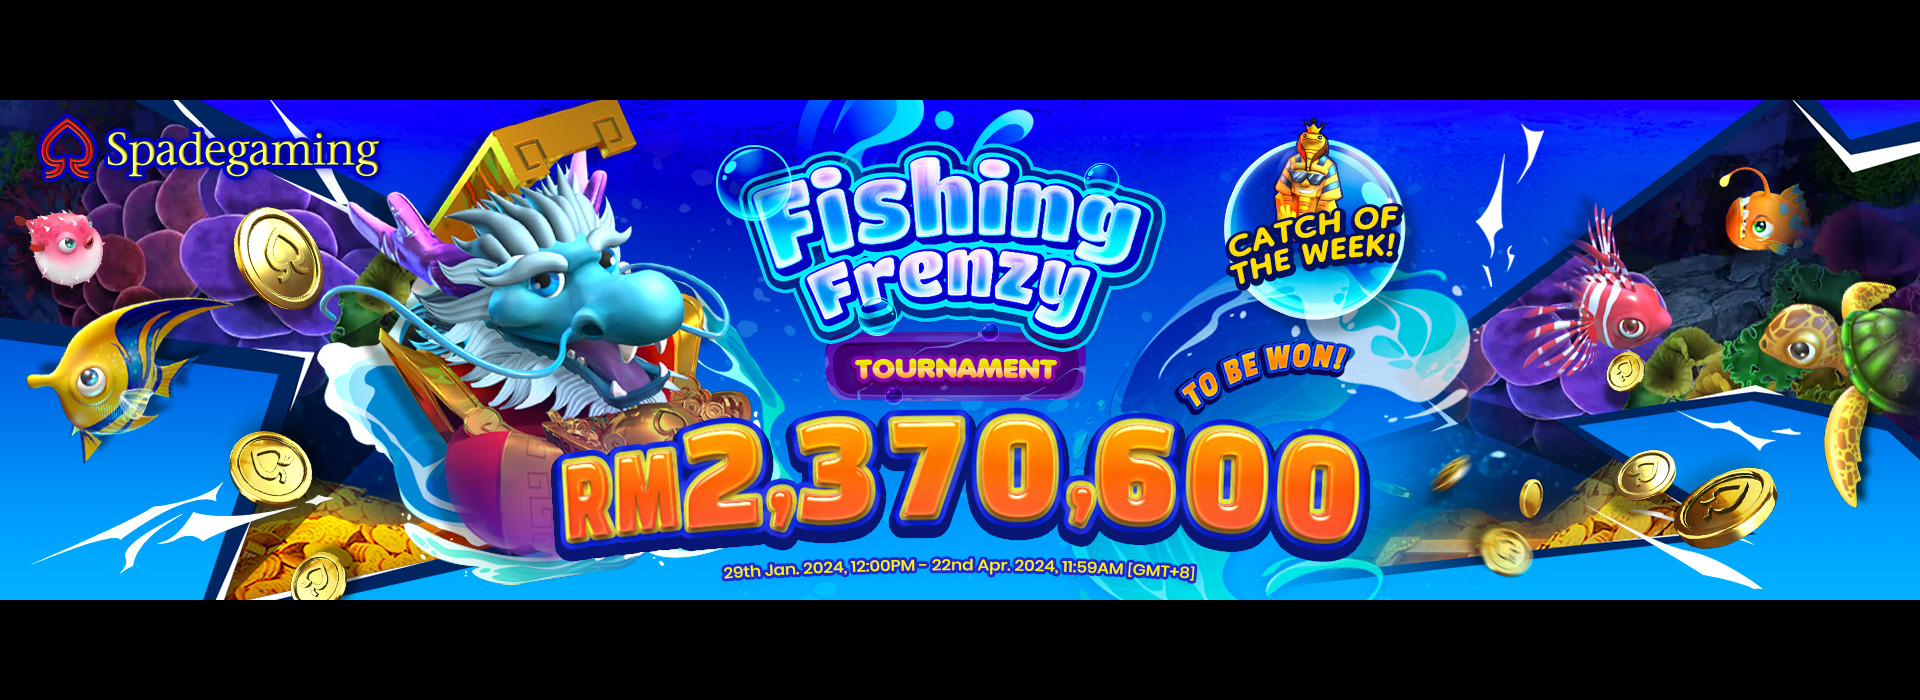 Spadegaming’s Grand Fishing Hunter Tournament! Play More! Win More!!Total Cash Prize Up to $526,800